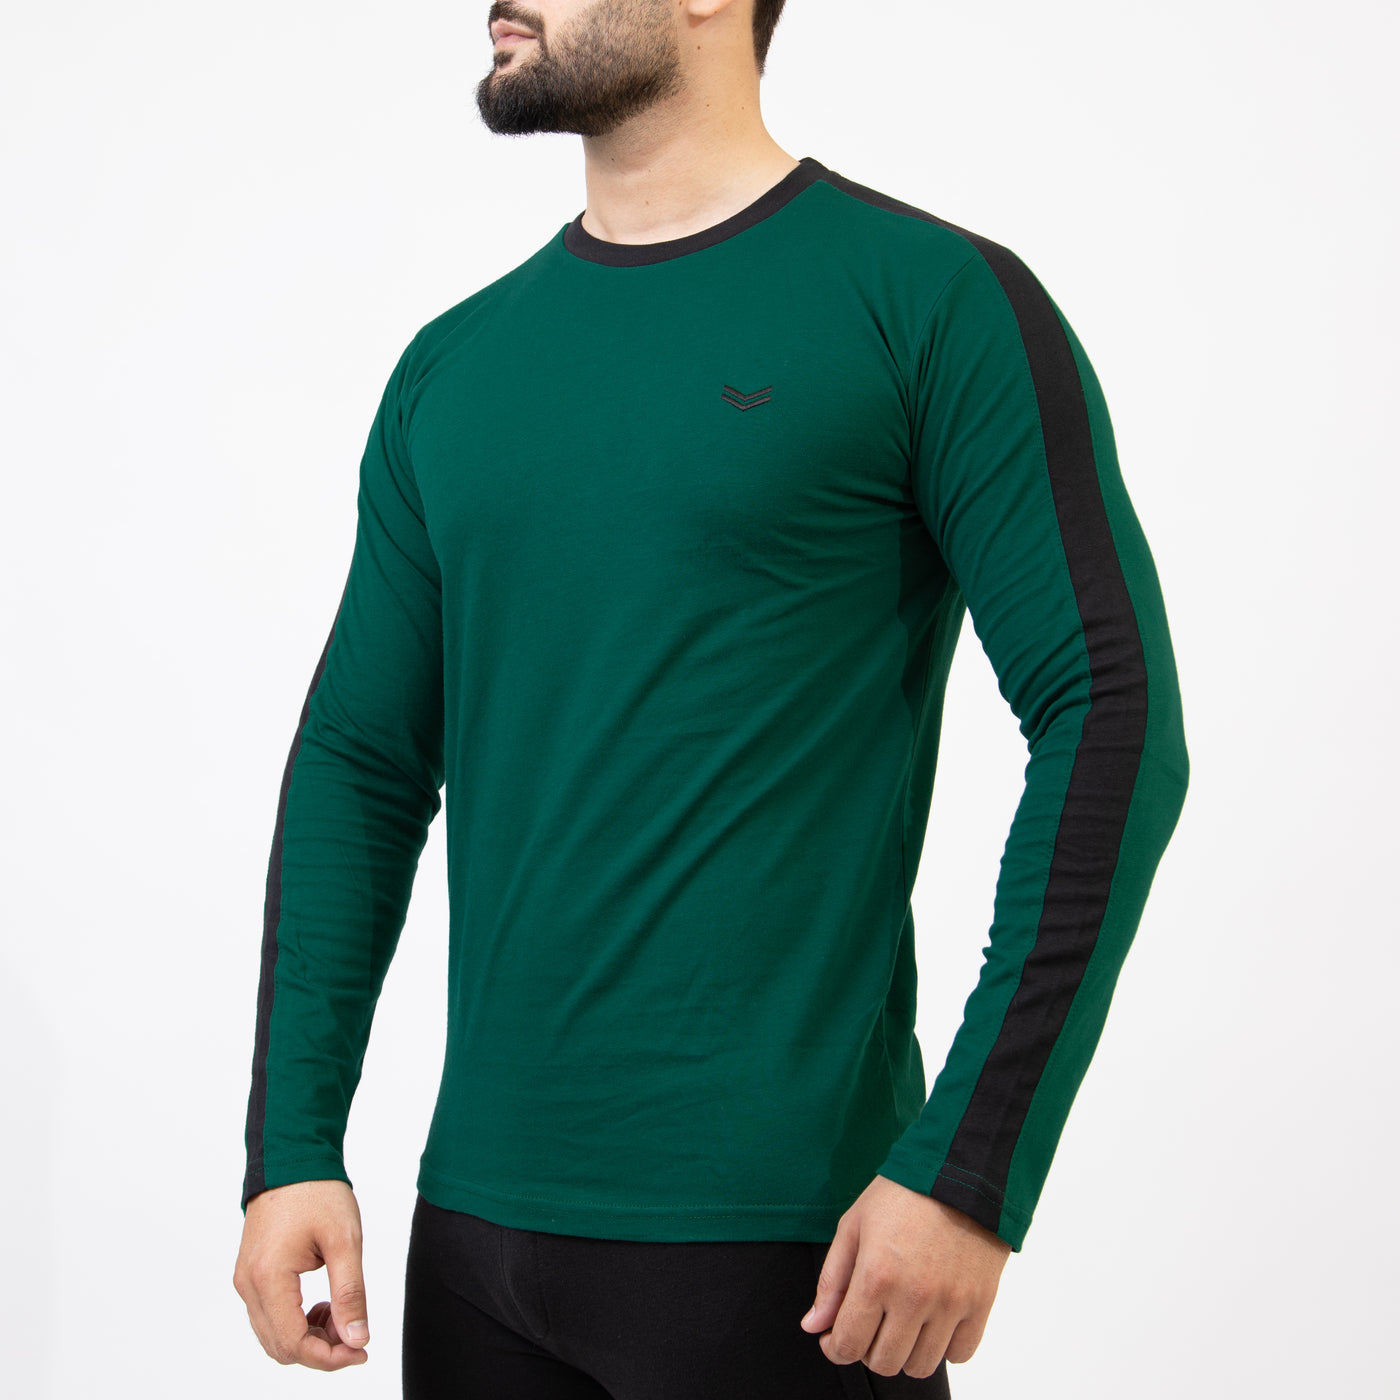 Green Full Sleeves T-Shirt with Black Panels